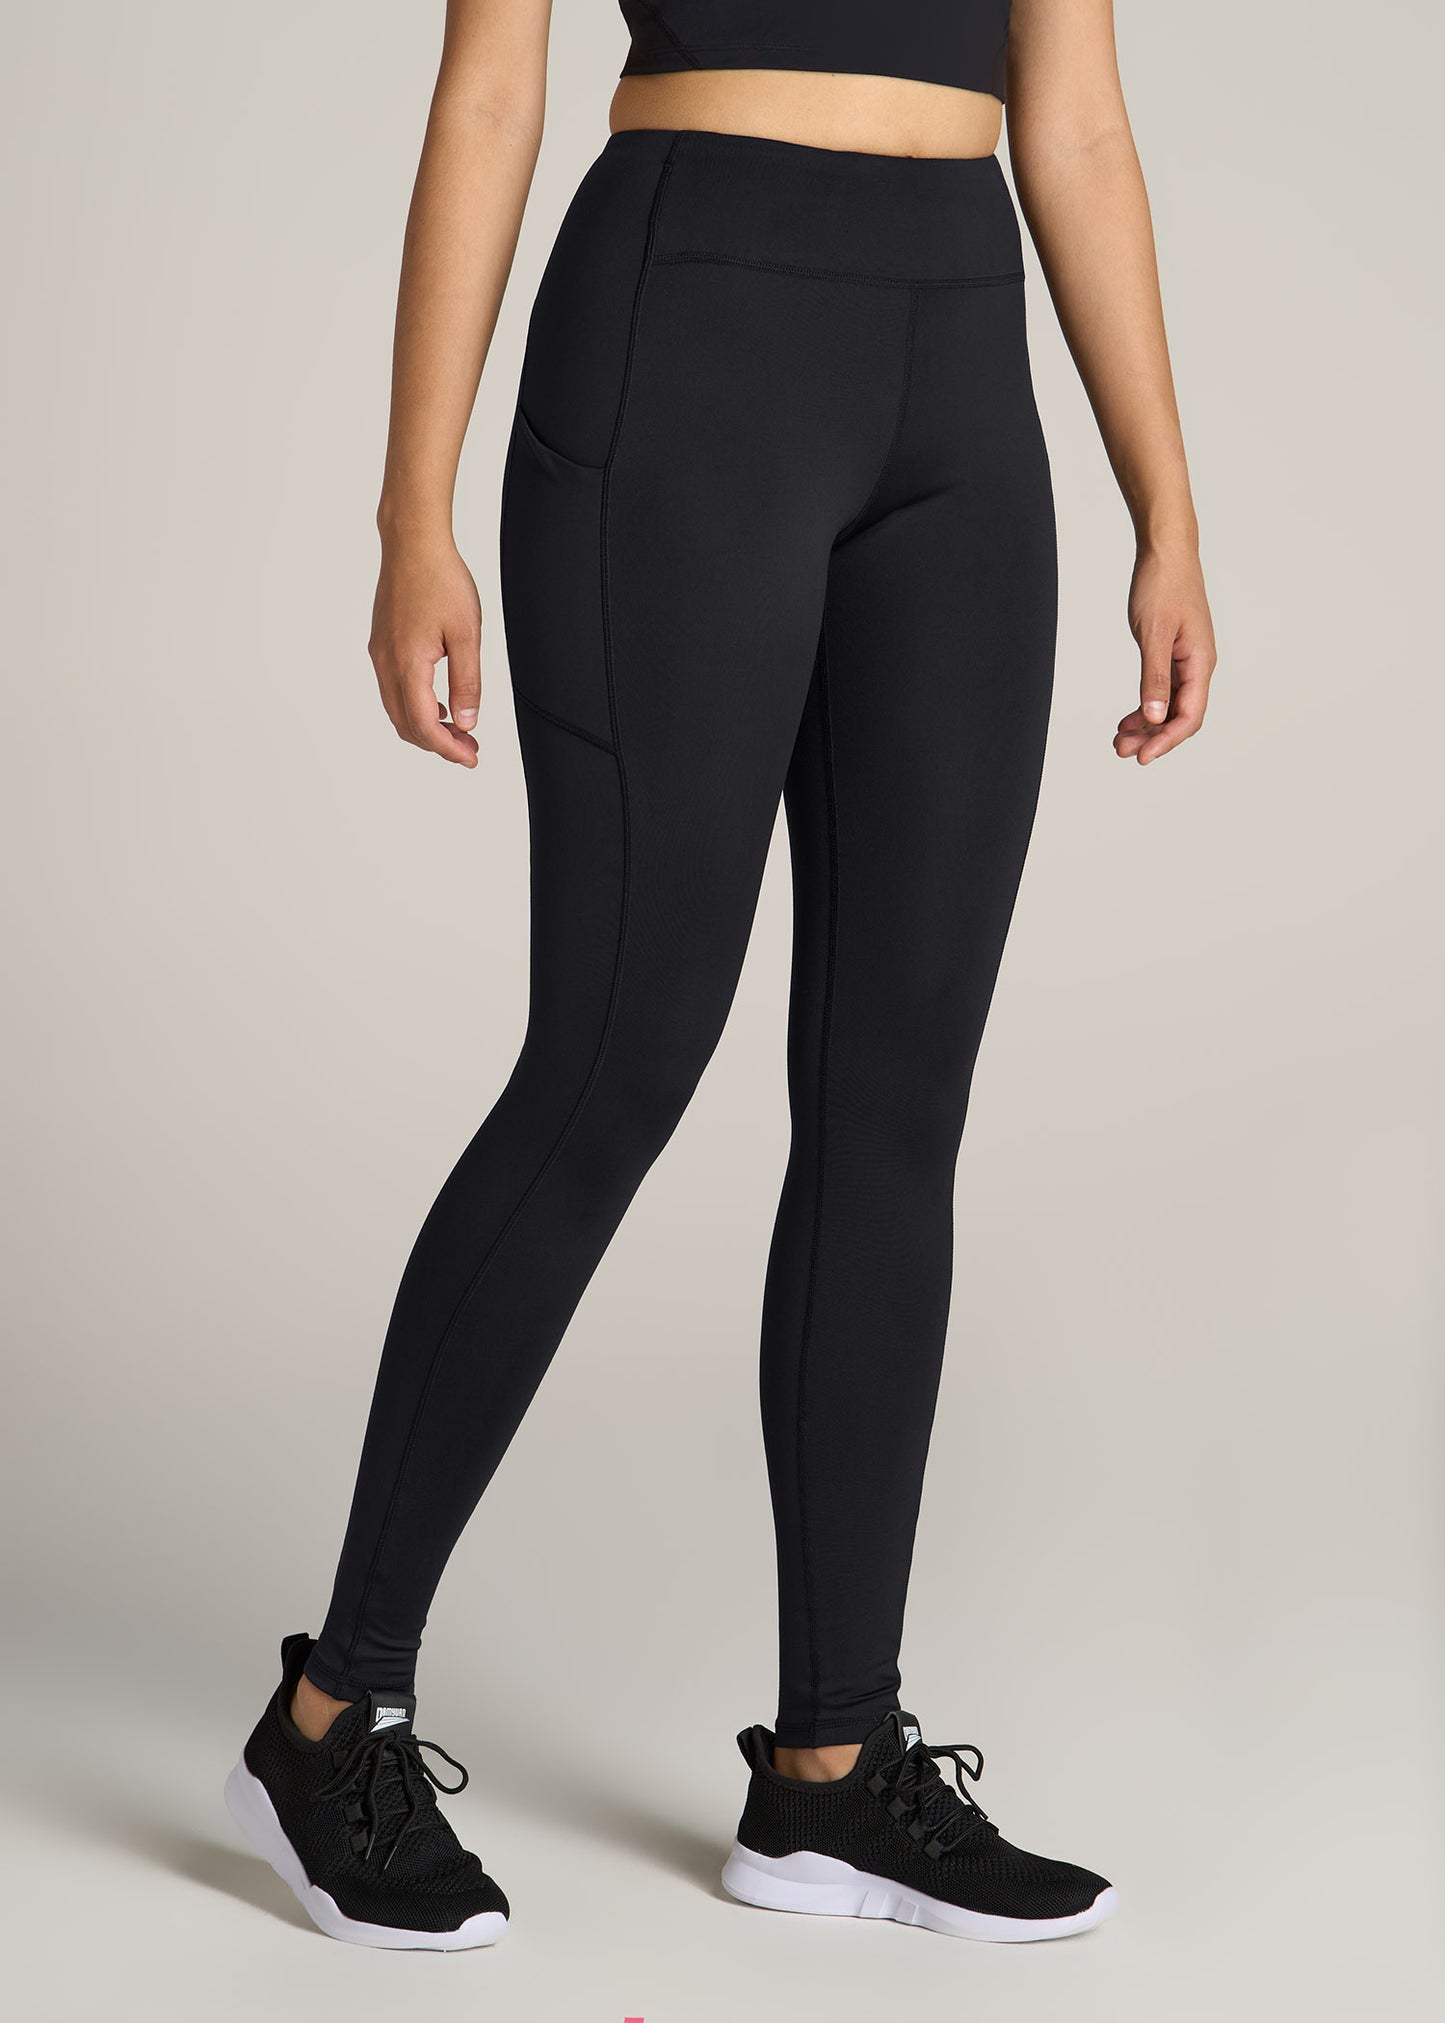 Women's Active Tall Leggings with Pockets